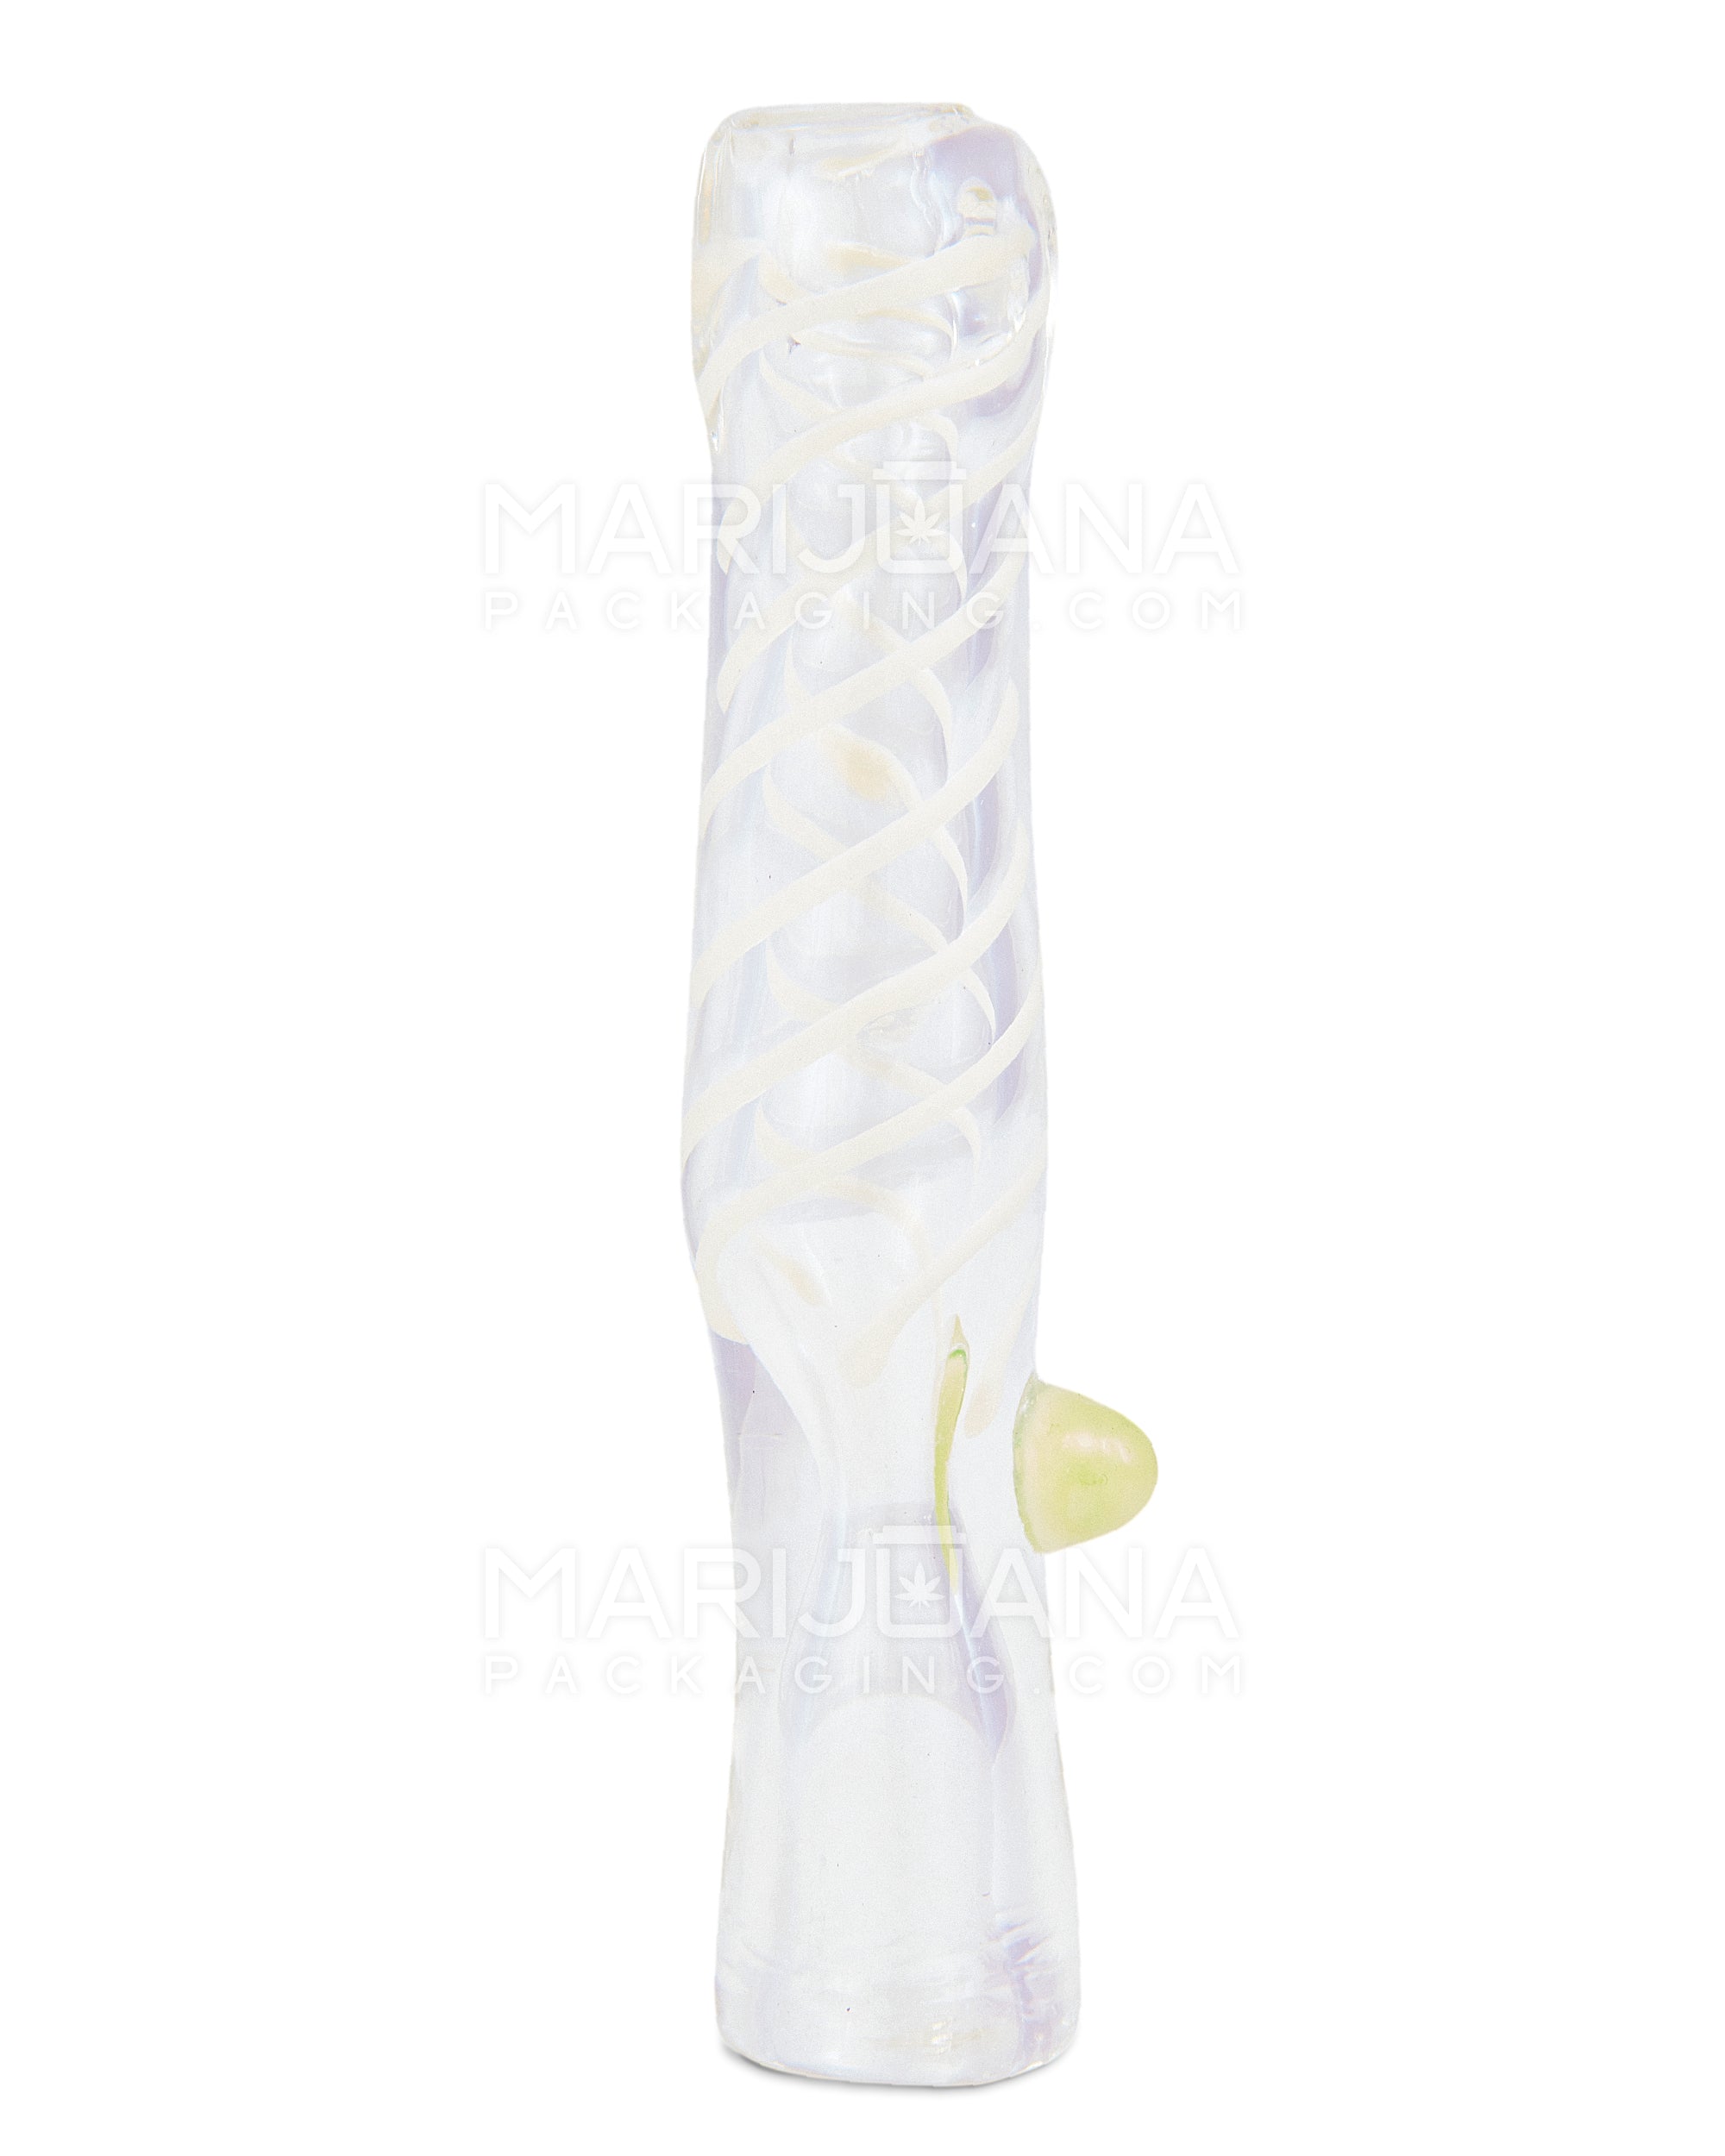 Spiral Chillum Hand Pipe w/ Knocker | 3.75in Long - Glass - Assorted - 6